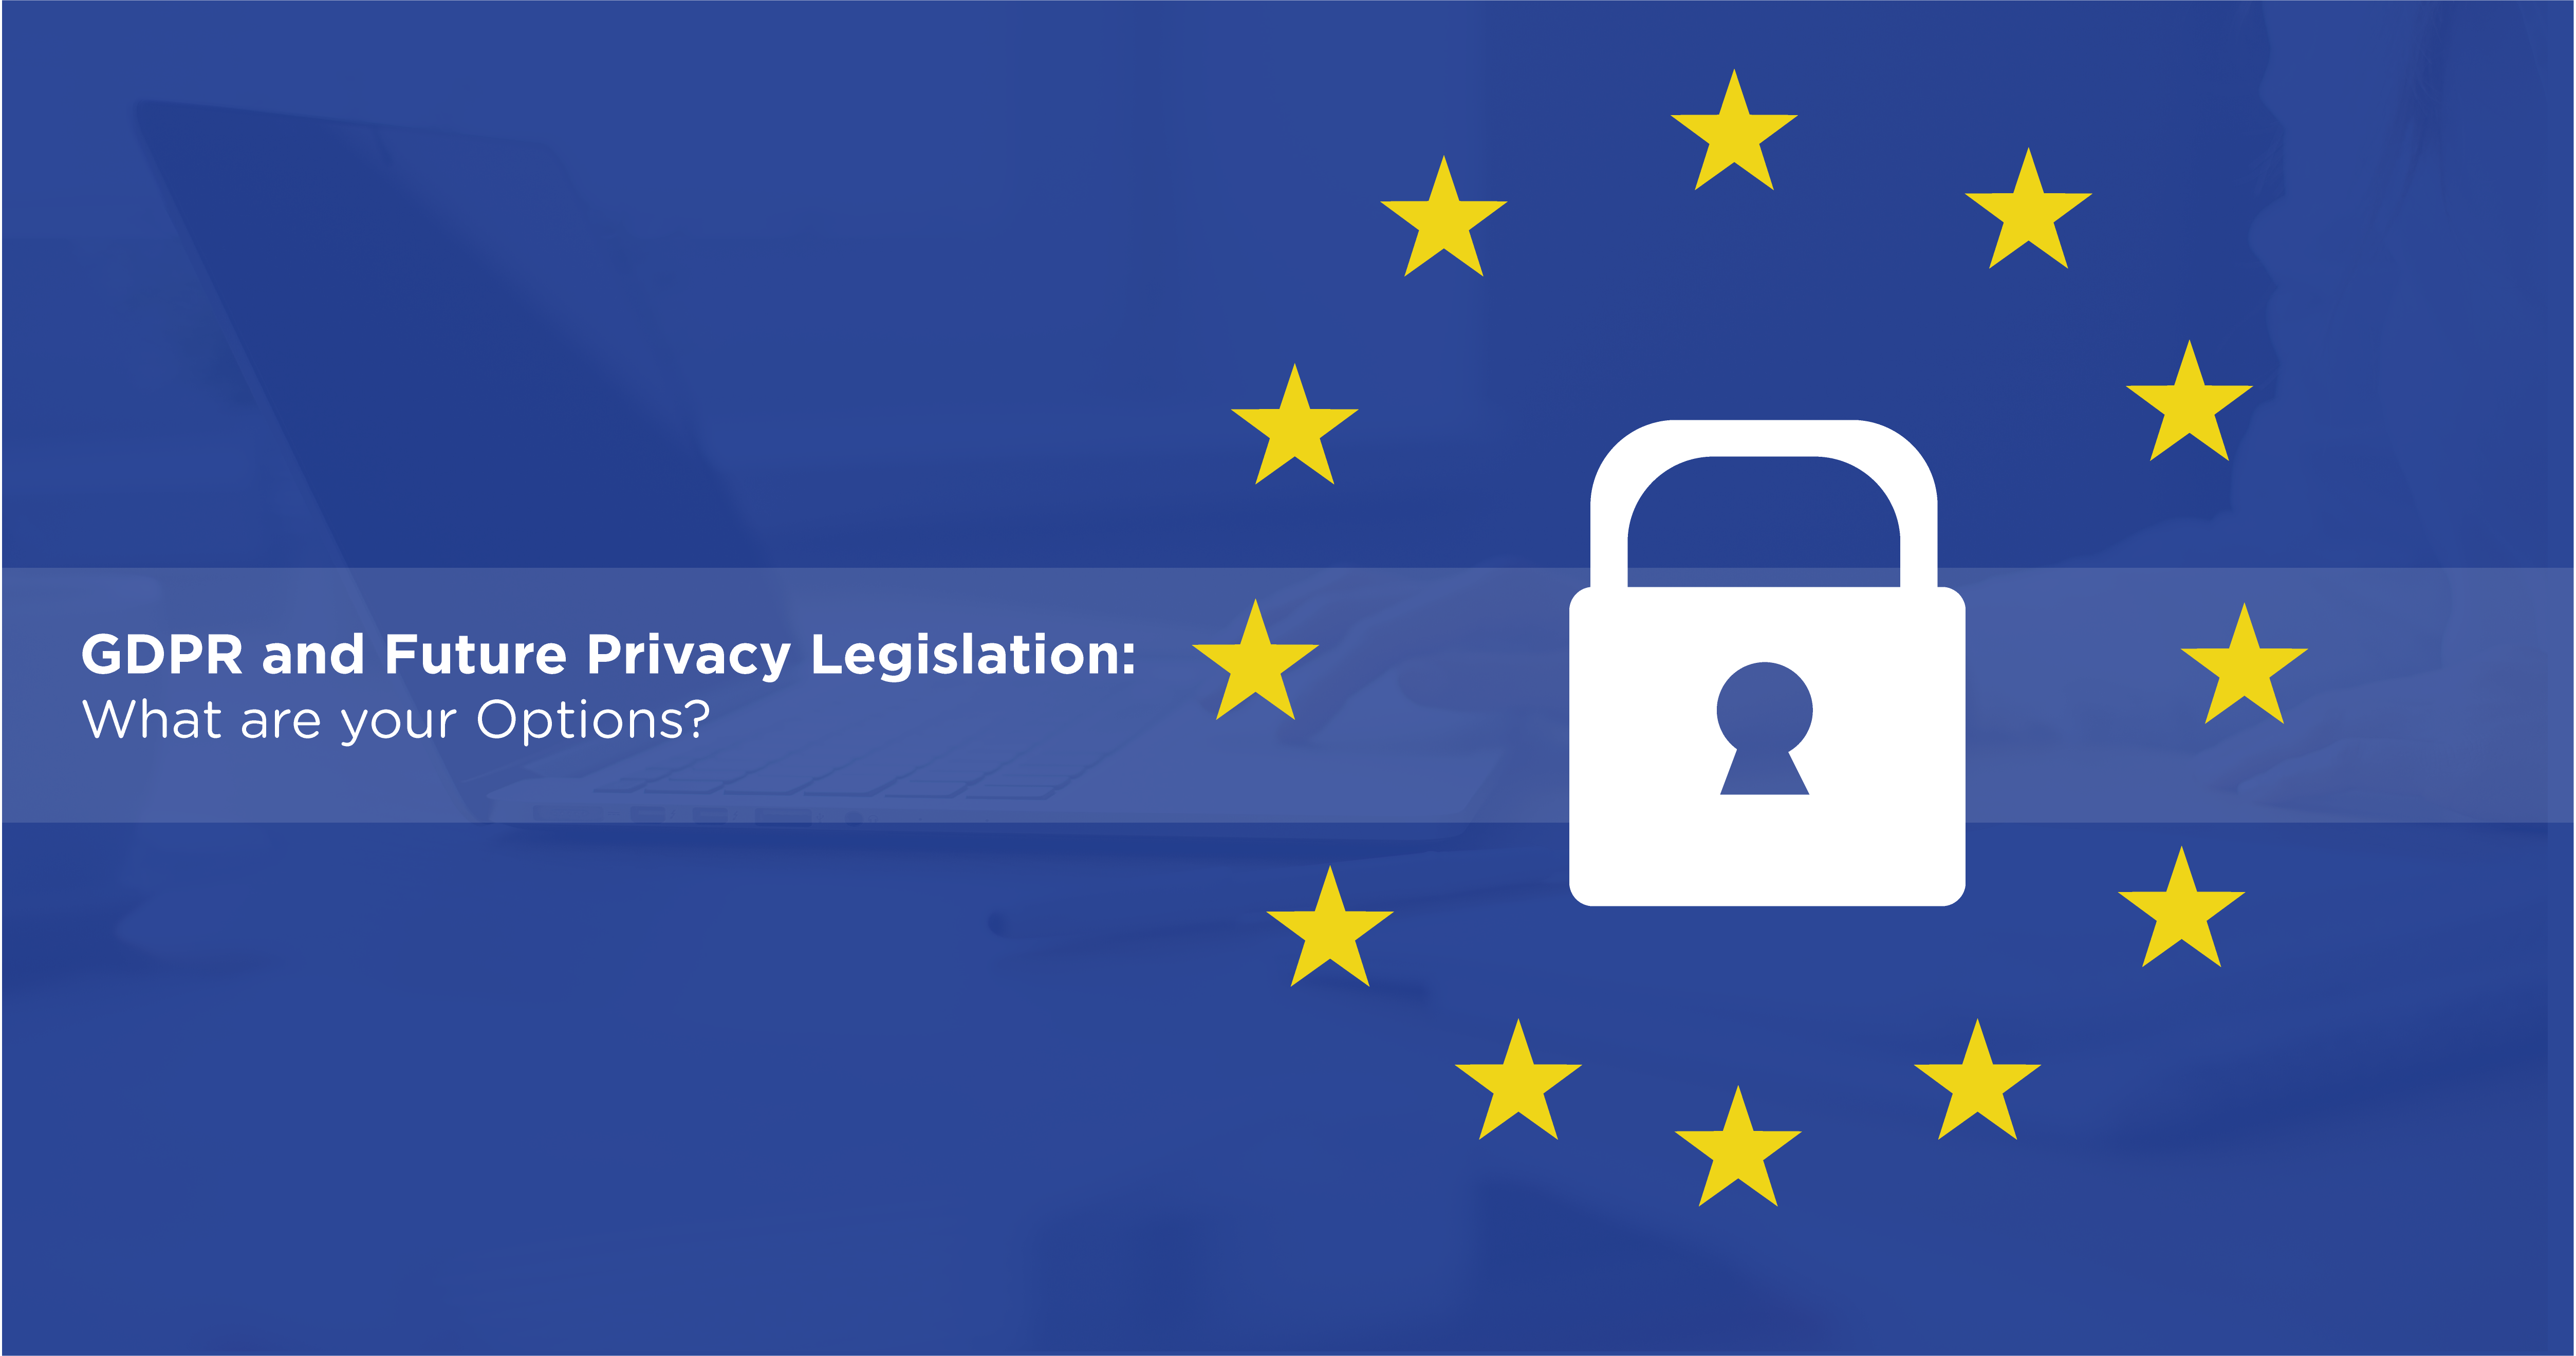 GDPR and Future Privacy Legislation: What are your Options?